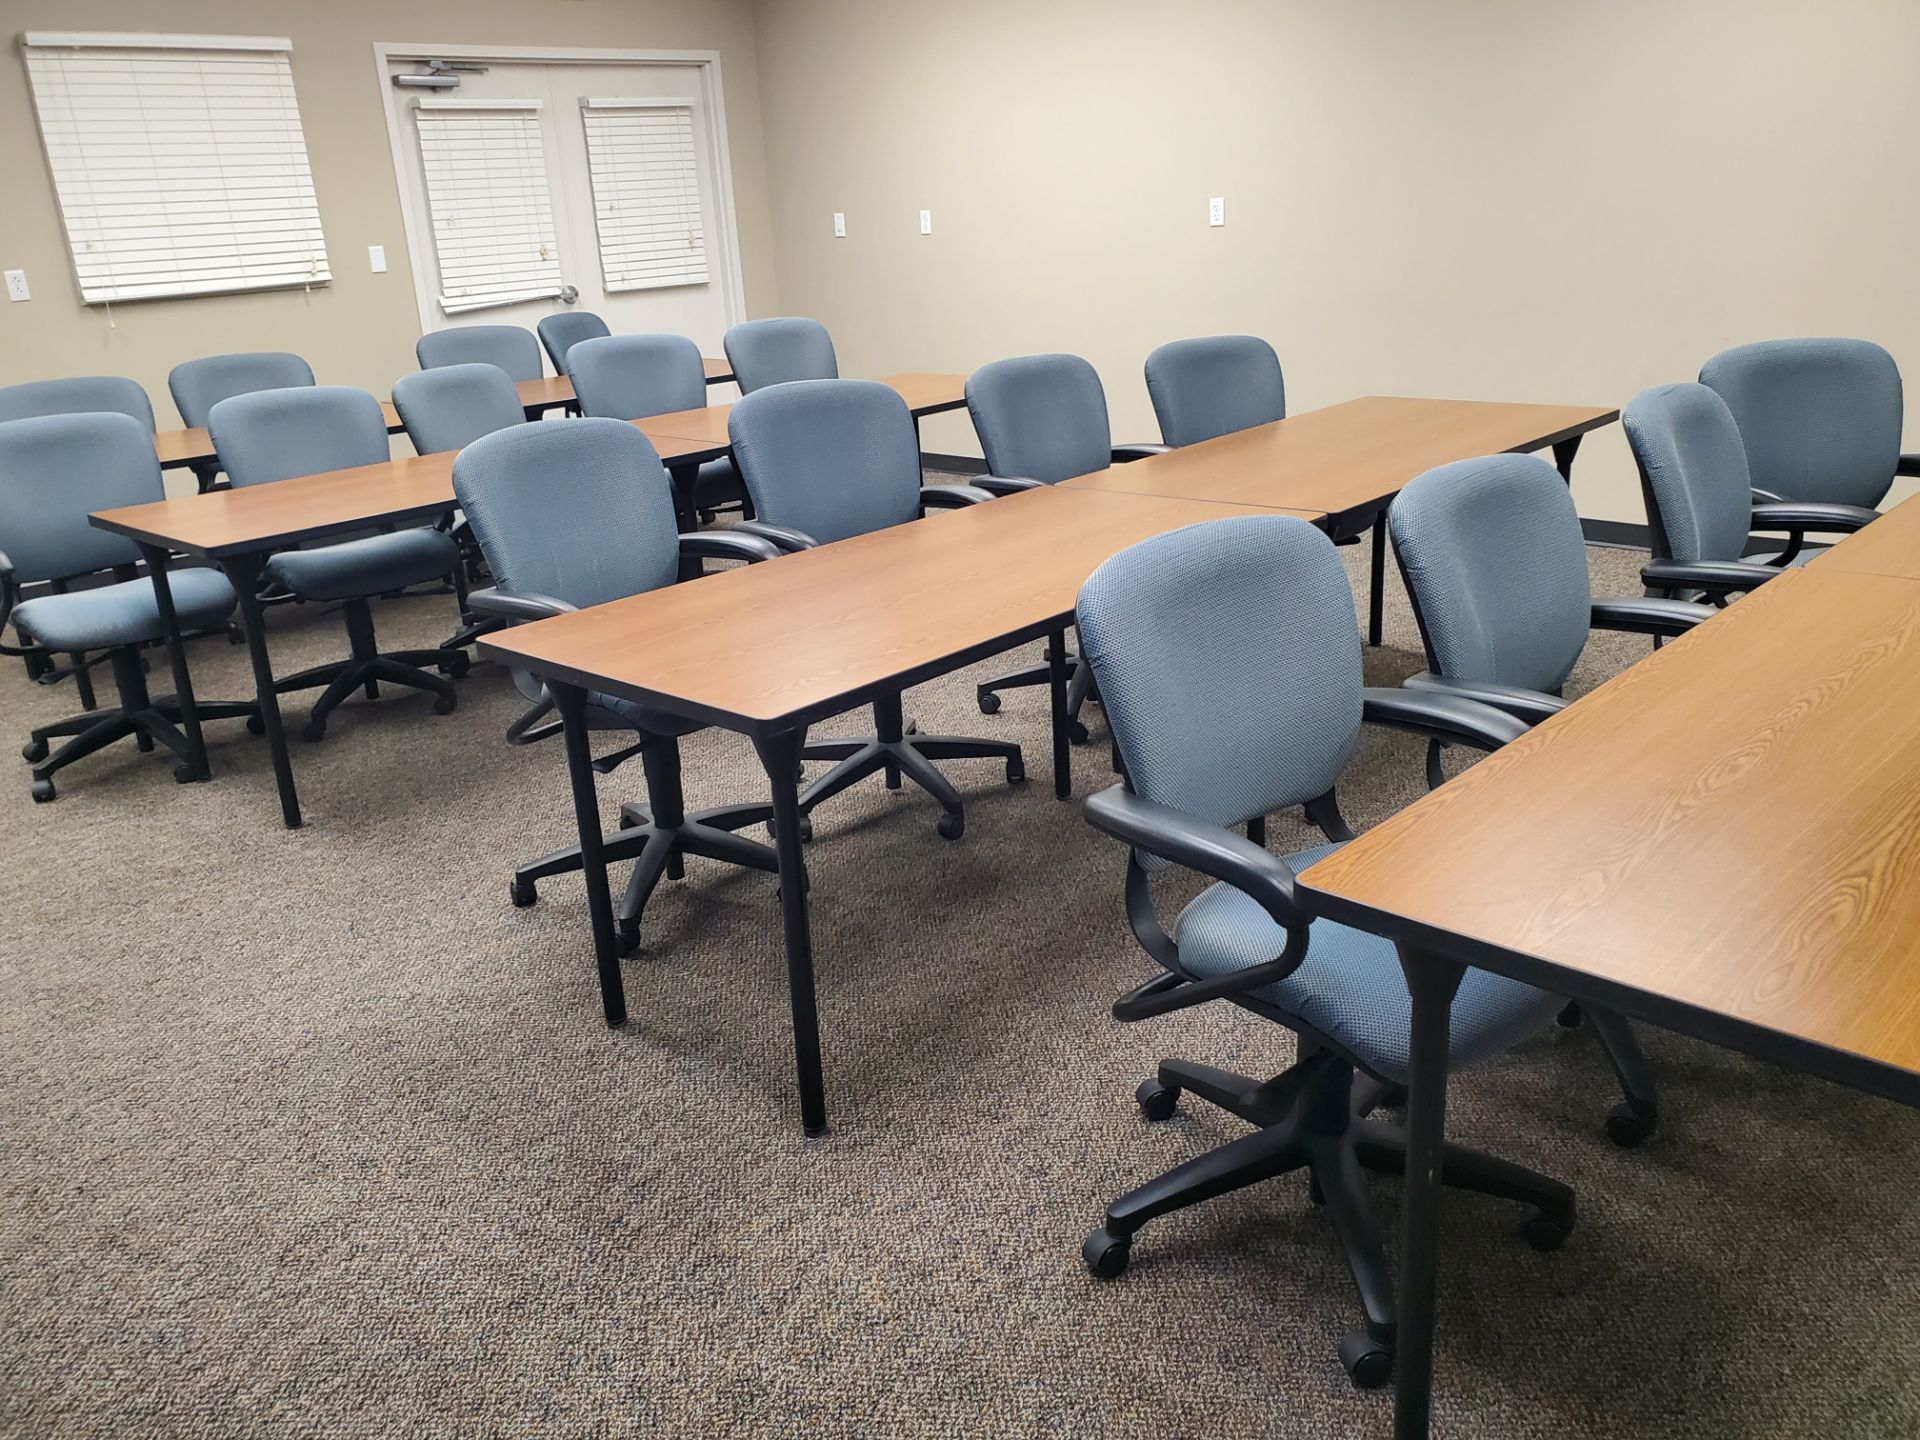 Conference Room Tables and Chairs as Pictured - Image 2 of 2